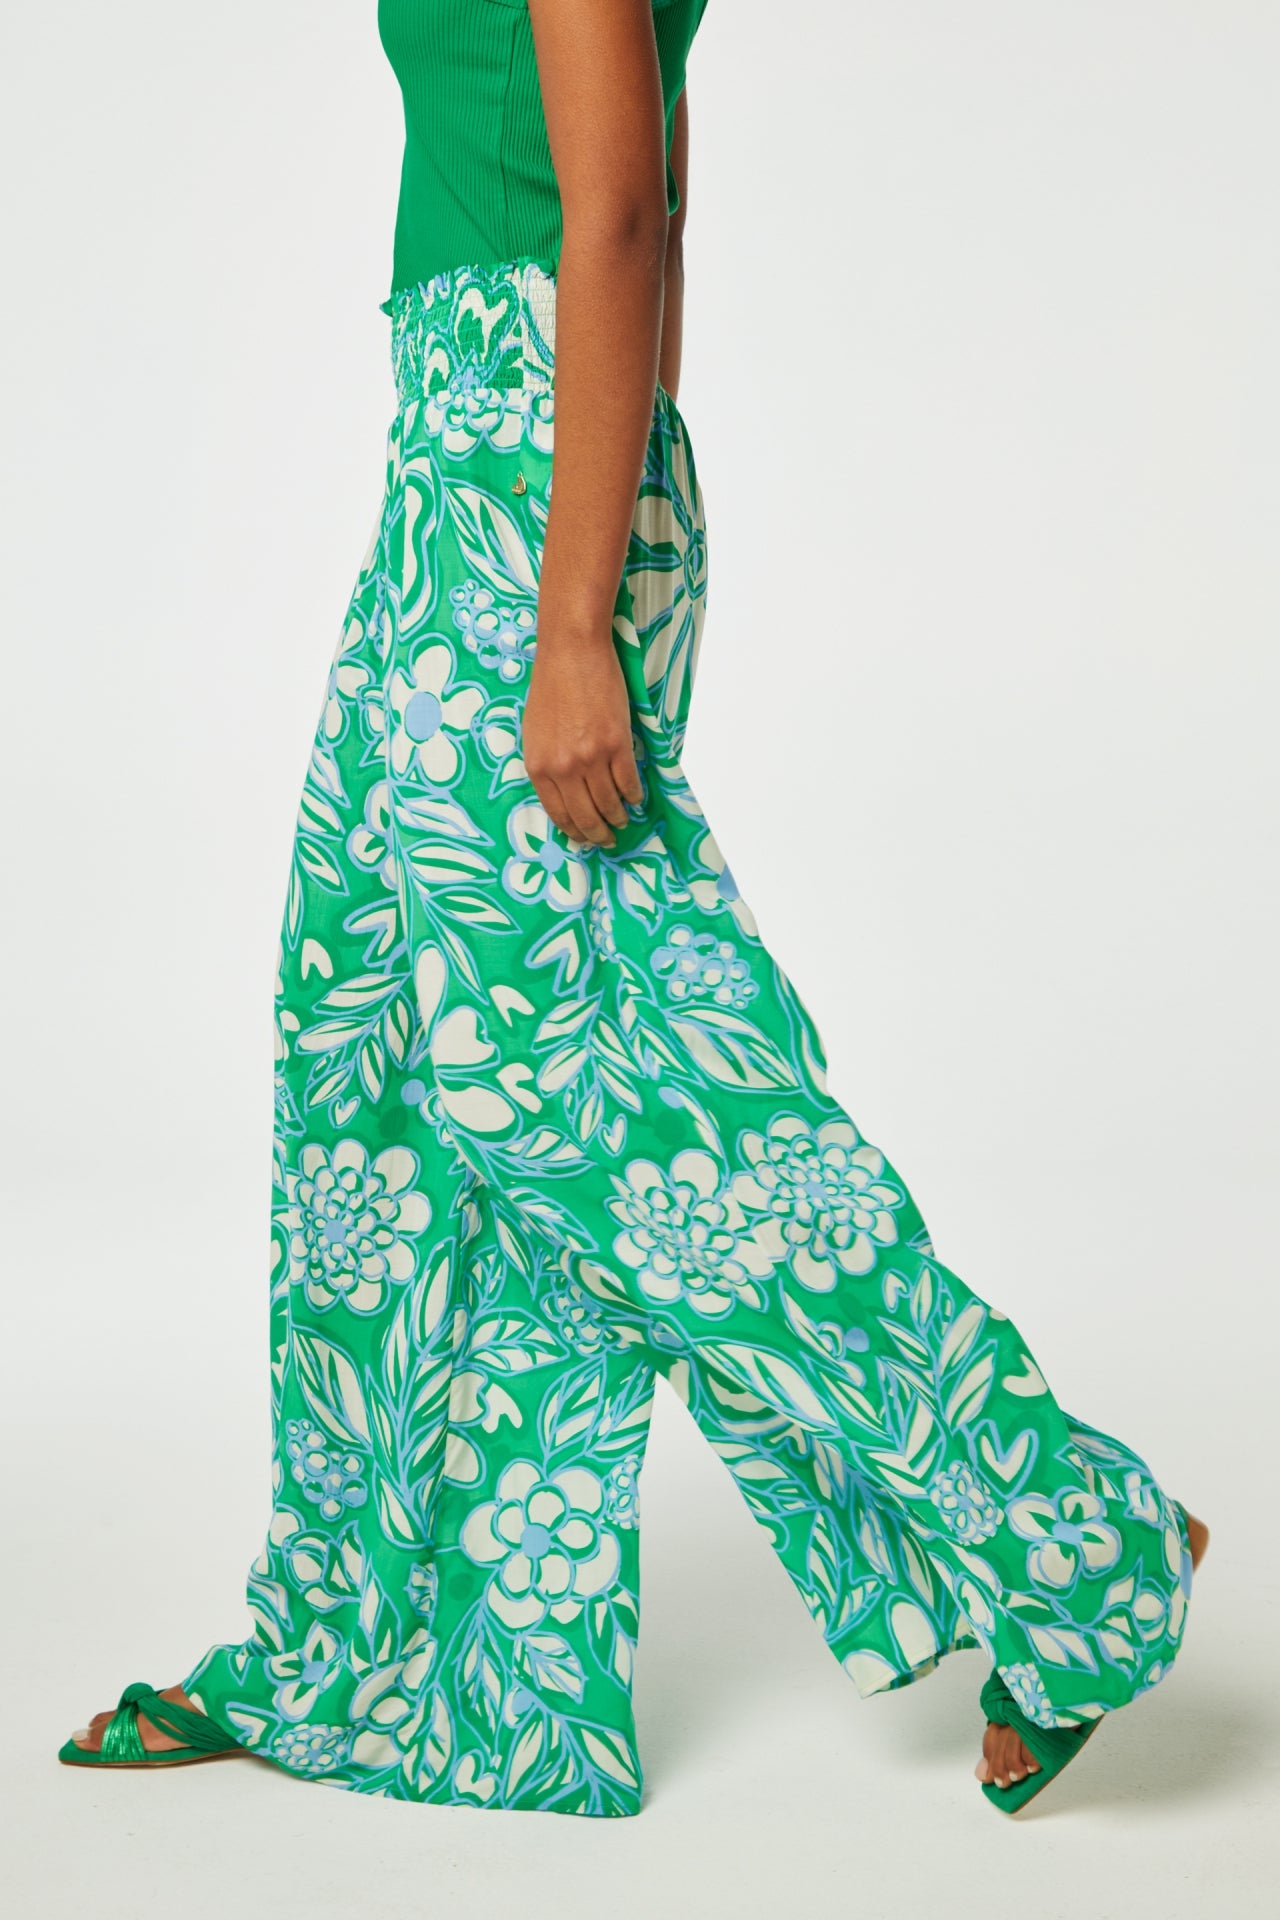 Palapa Trousers | Green Apple/Grass Is